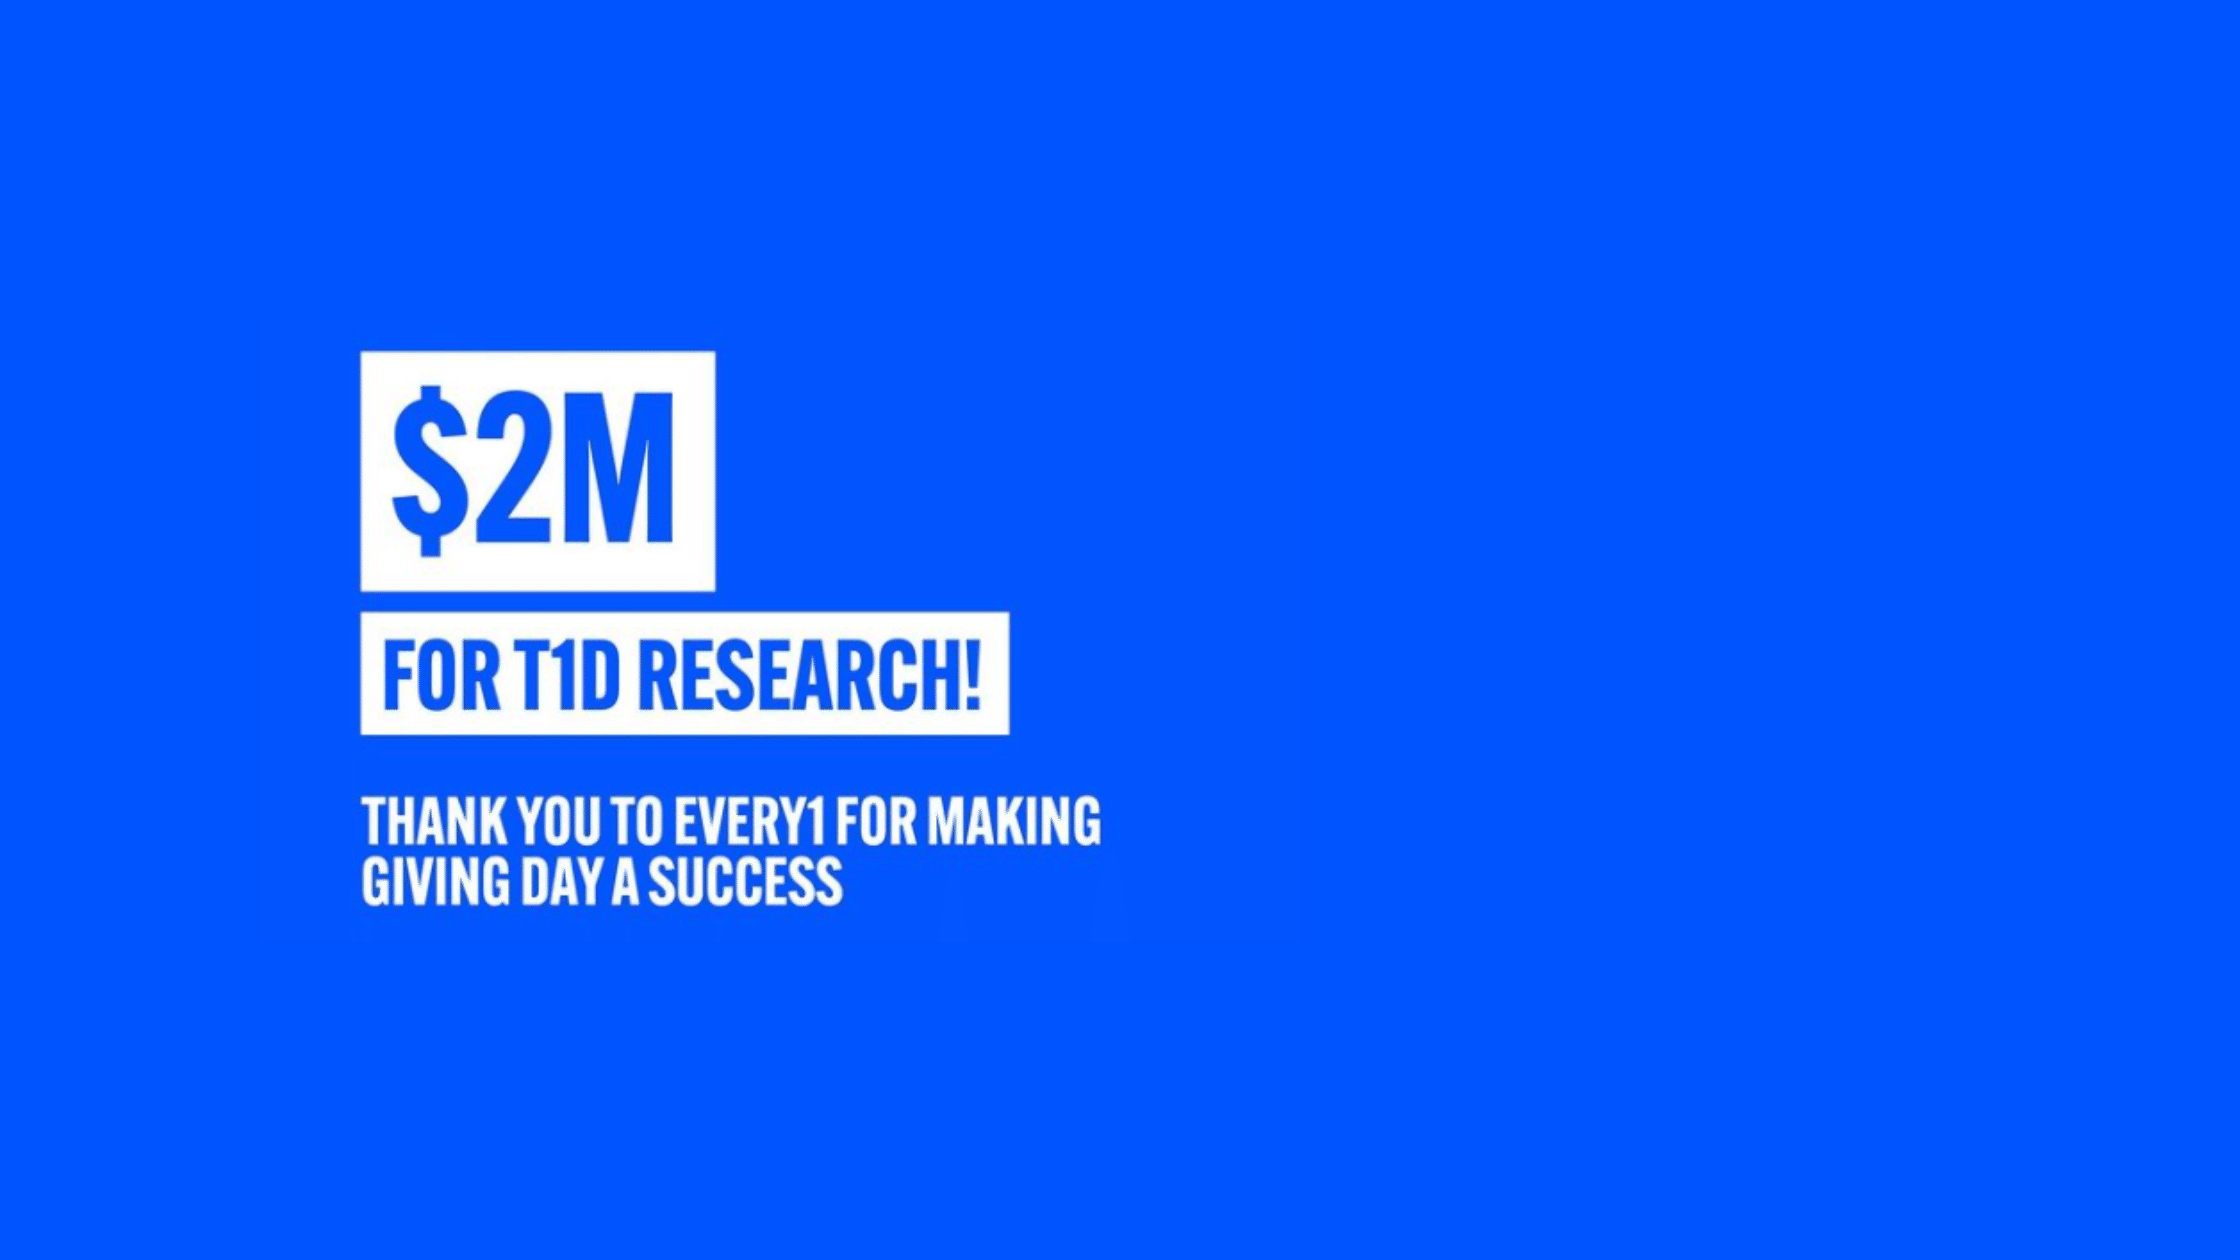 We did it! $2M for type 1 diabetes research